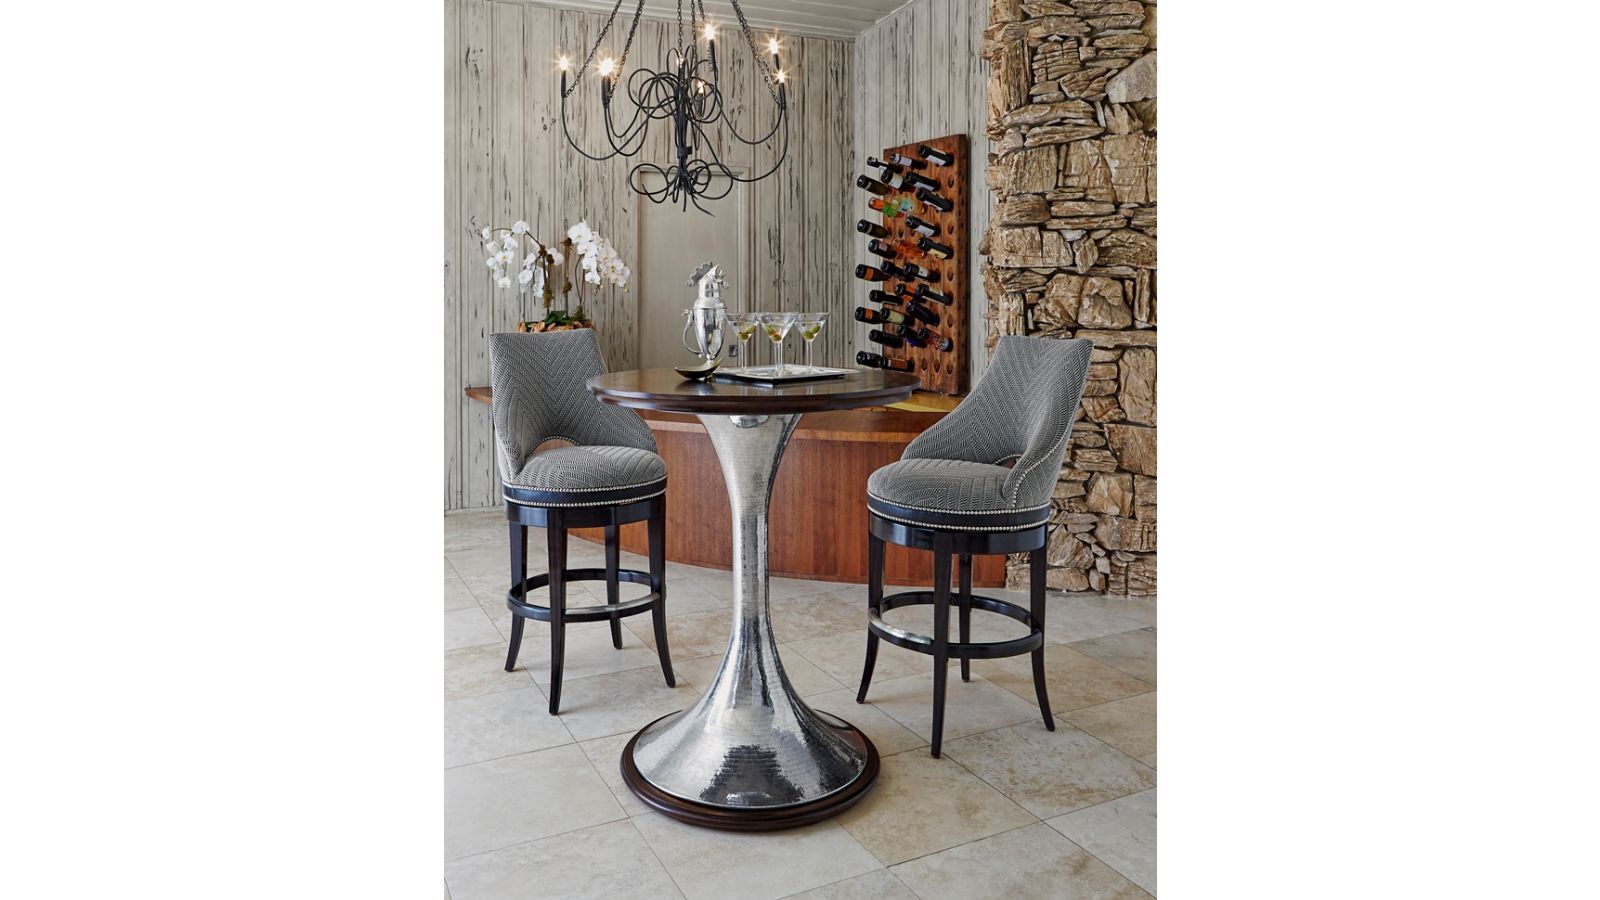 CINCHED BISTRO TABLE